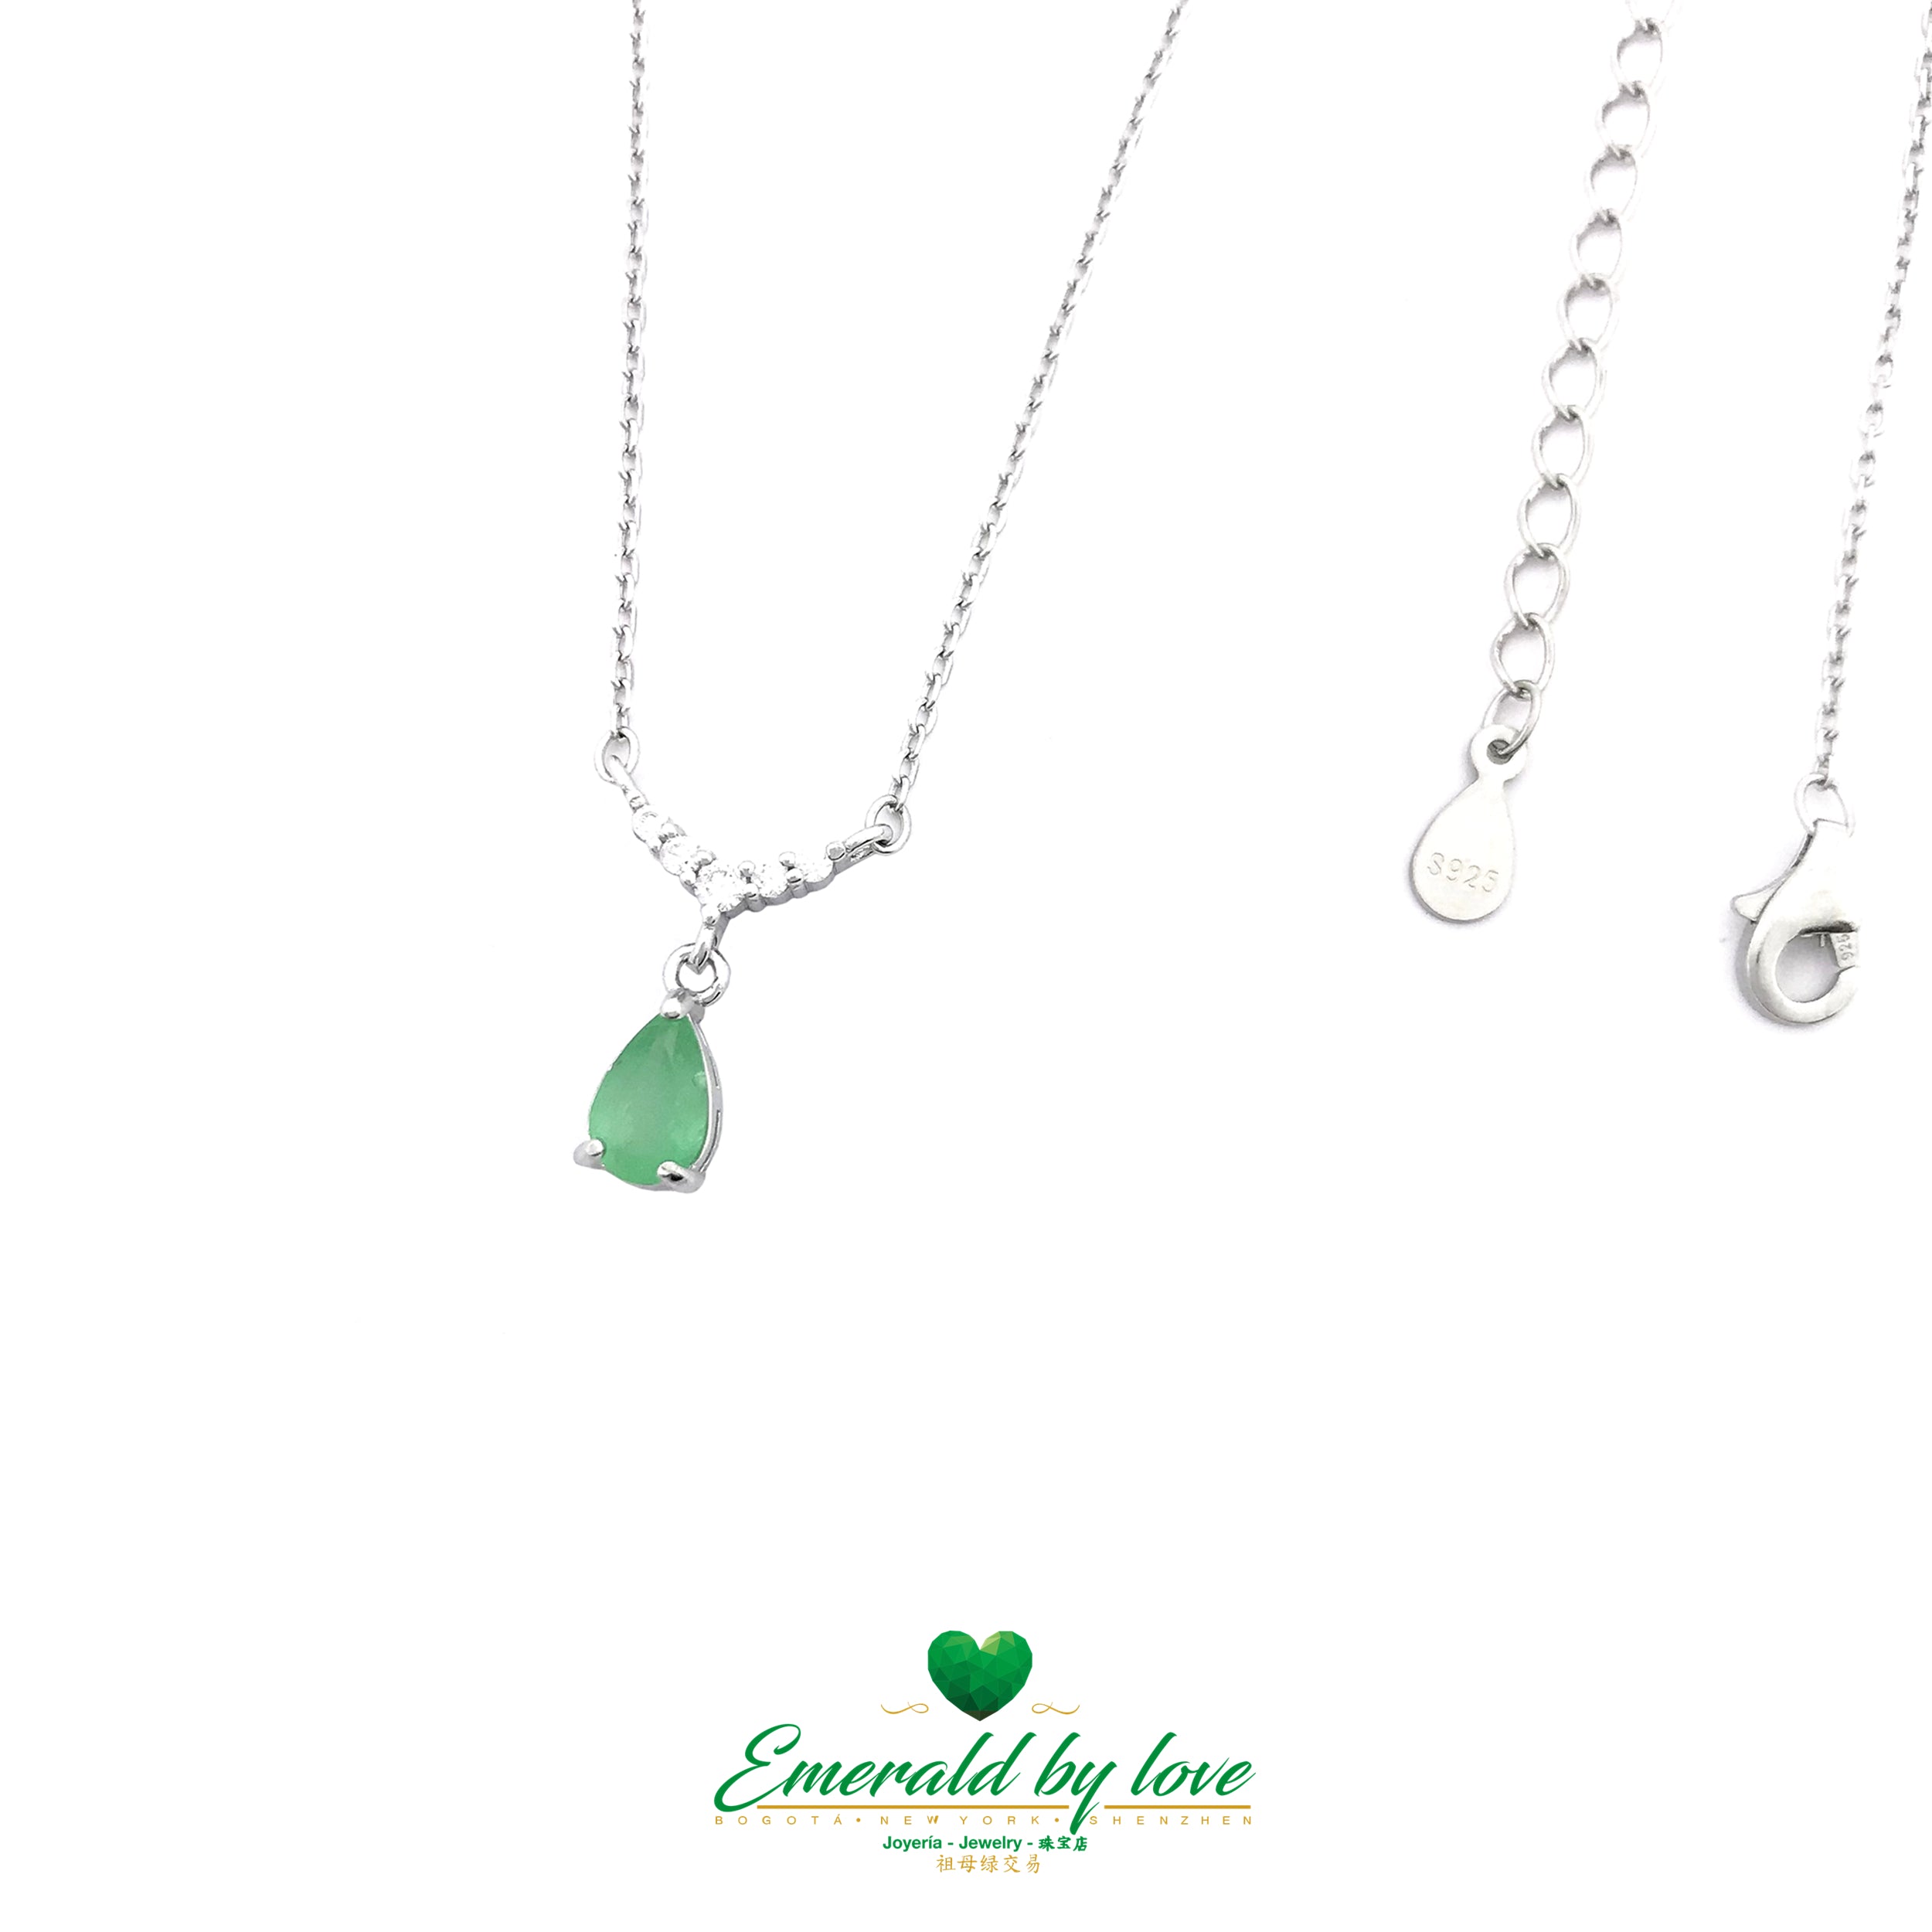 Silver Pendant with Tear-Shaped Crystal Emerald and Cubic Zirconia Accent